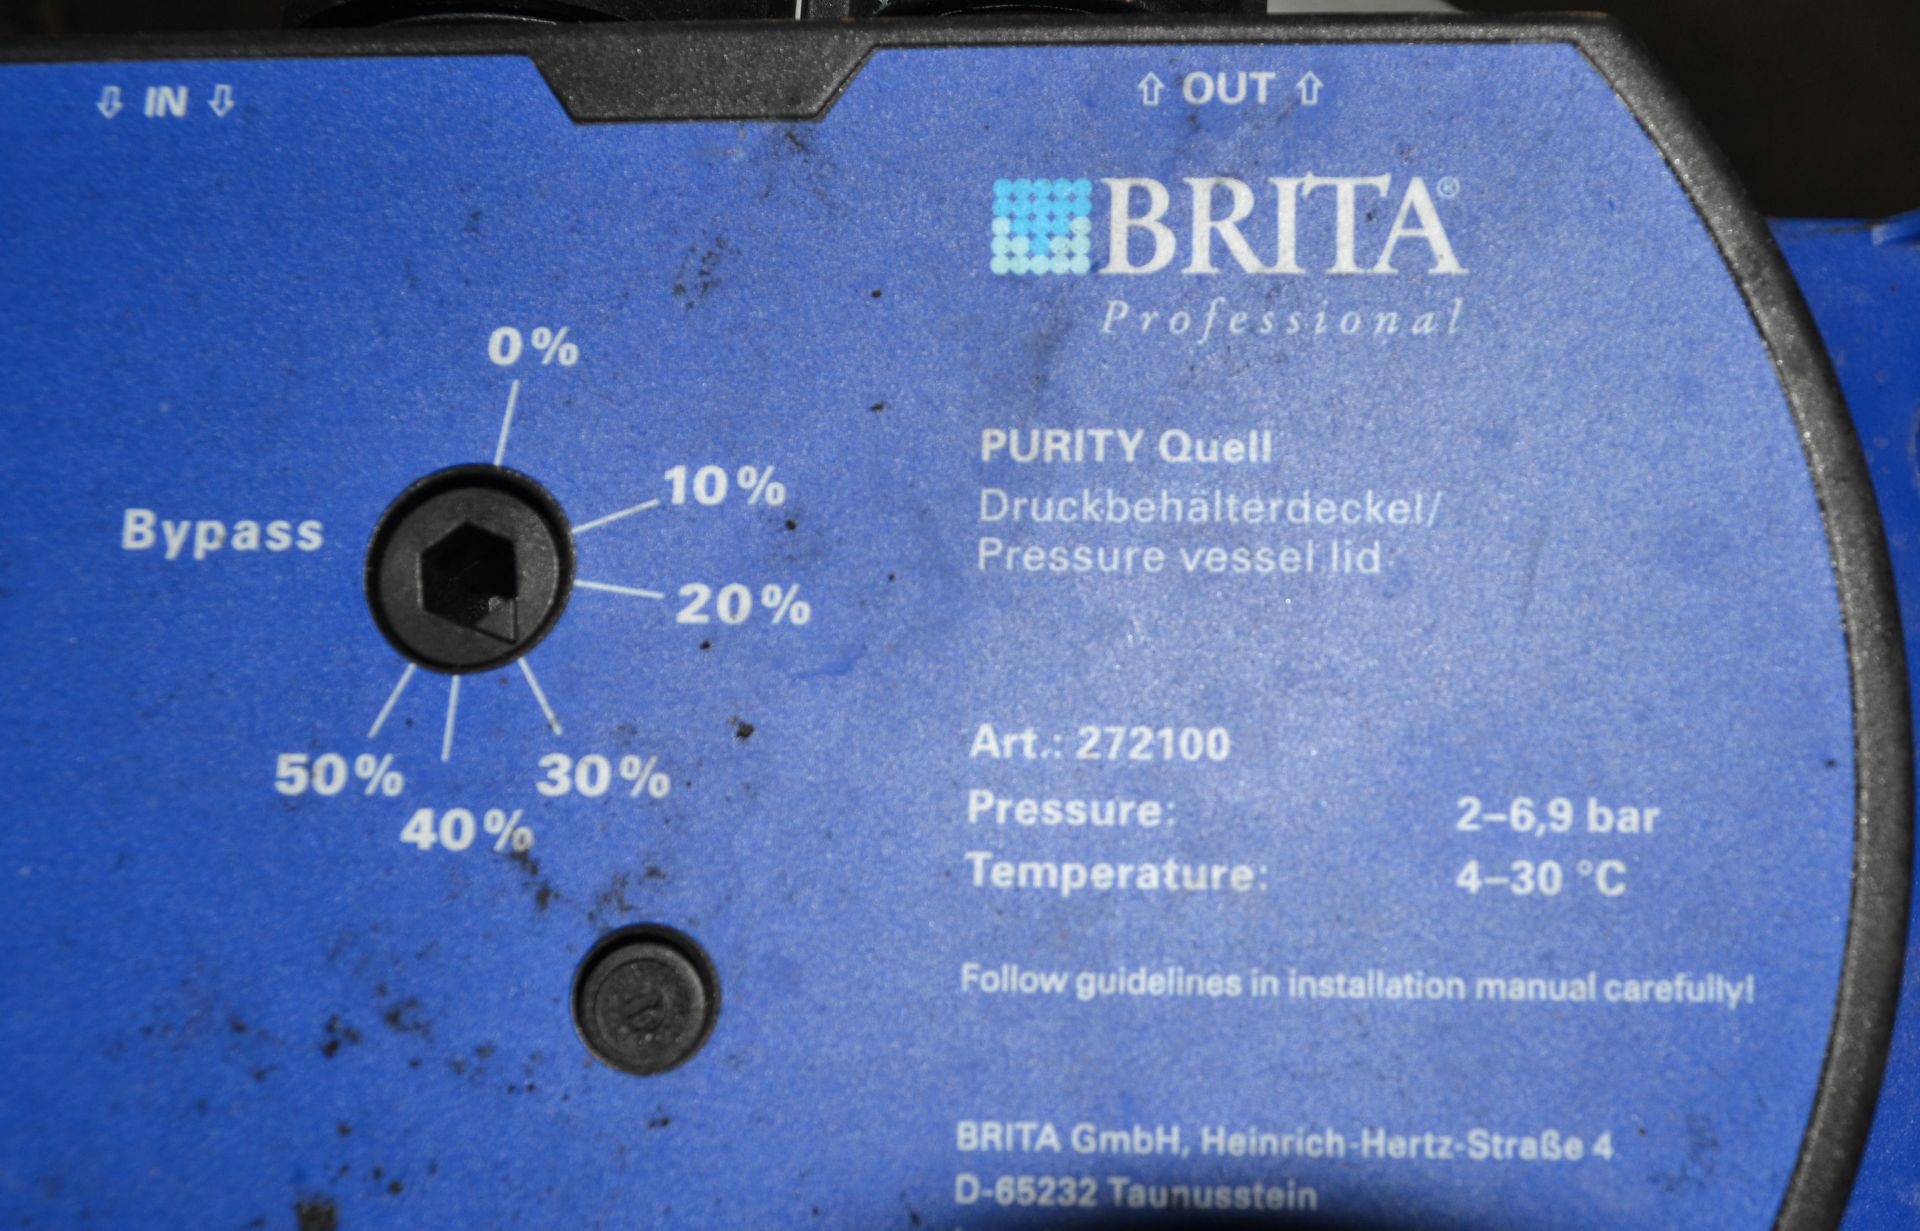 1 x Brita Professional Purity 600 Quell ST Filter - Ref: FJC007 - CL124 - Location: Bolton BL1 - - Image 4 of 7